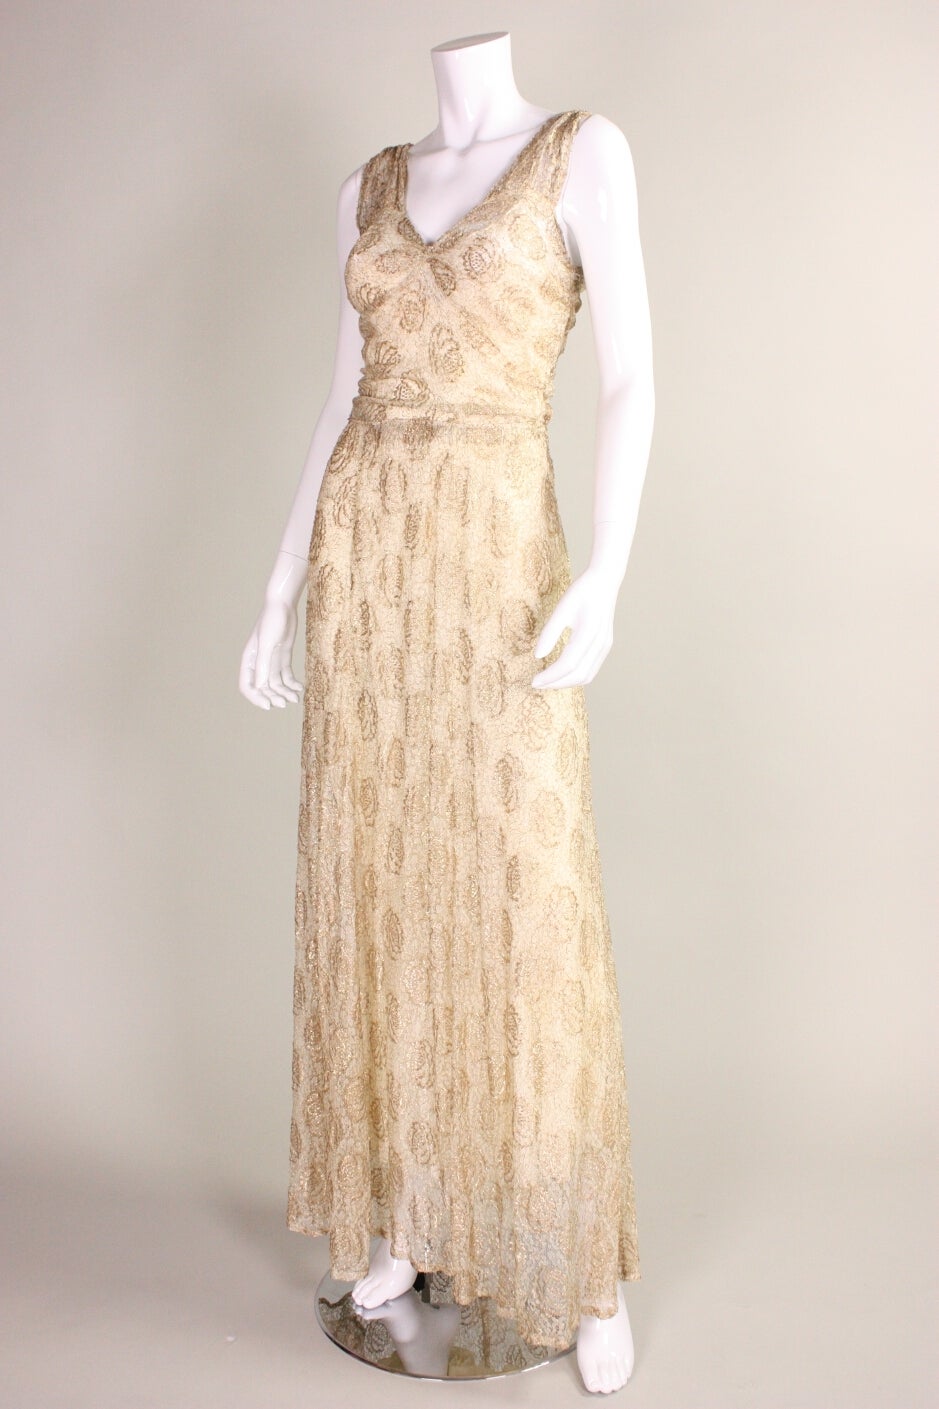 Vintage gown dates to the 1930's and is made of ivory lace woven with metallic gold lamé in a floral motif.  Shoulders and center front bust are gathered.  V-neck.  Side snap and hook and eye closures.  Unlined, but comes with a bias-cut slip.

No